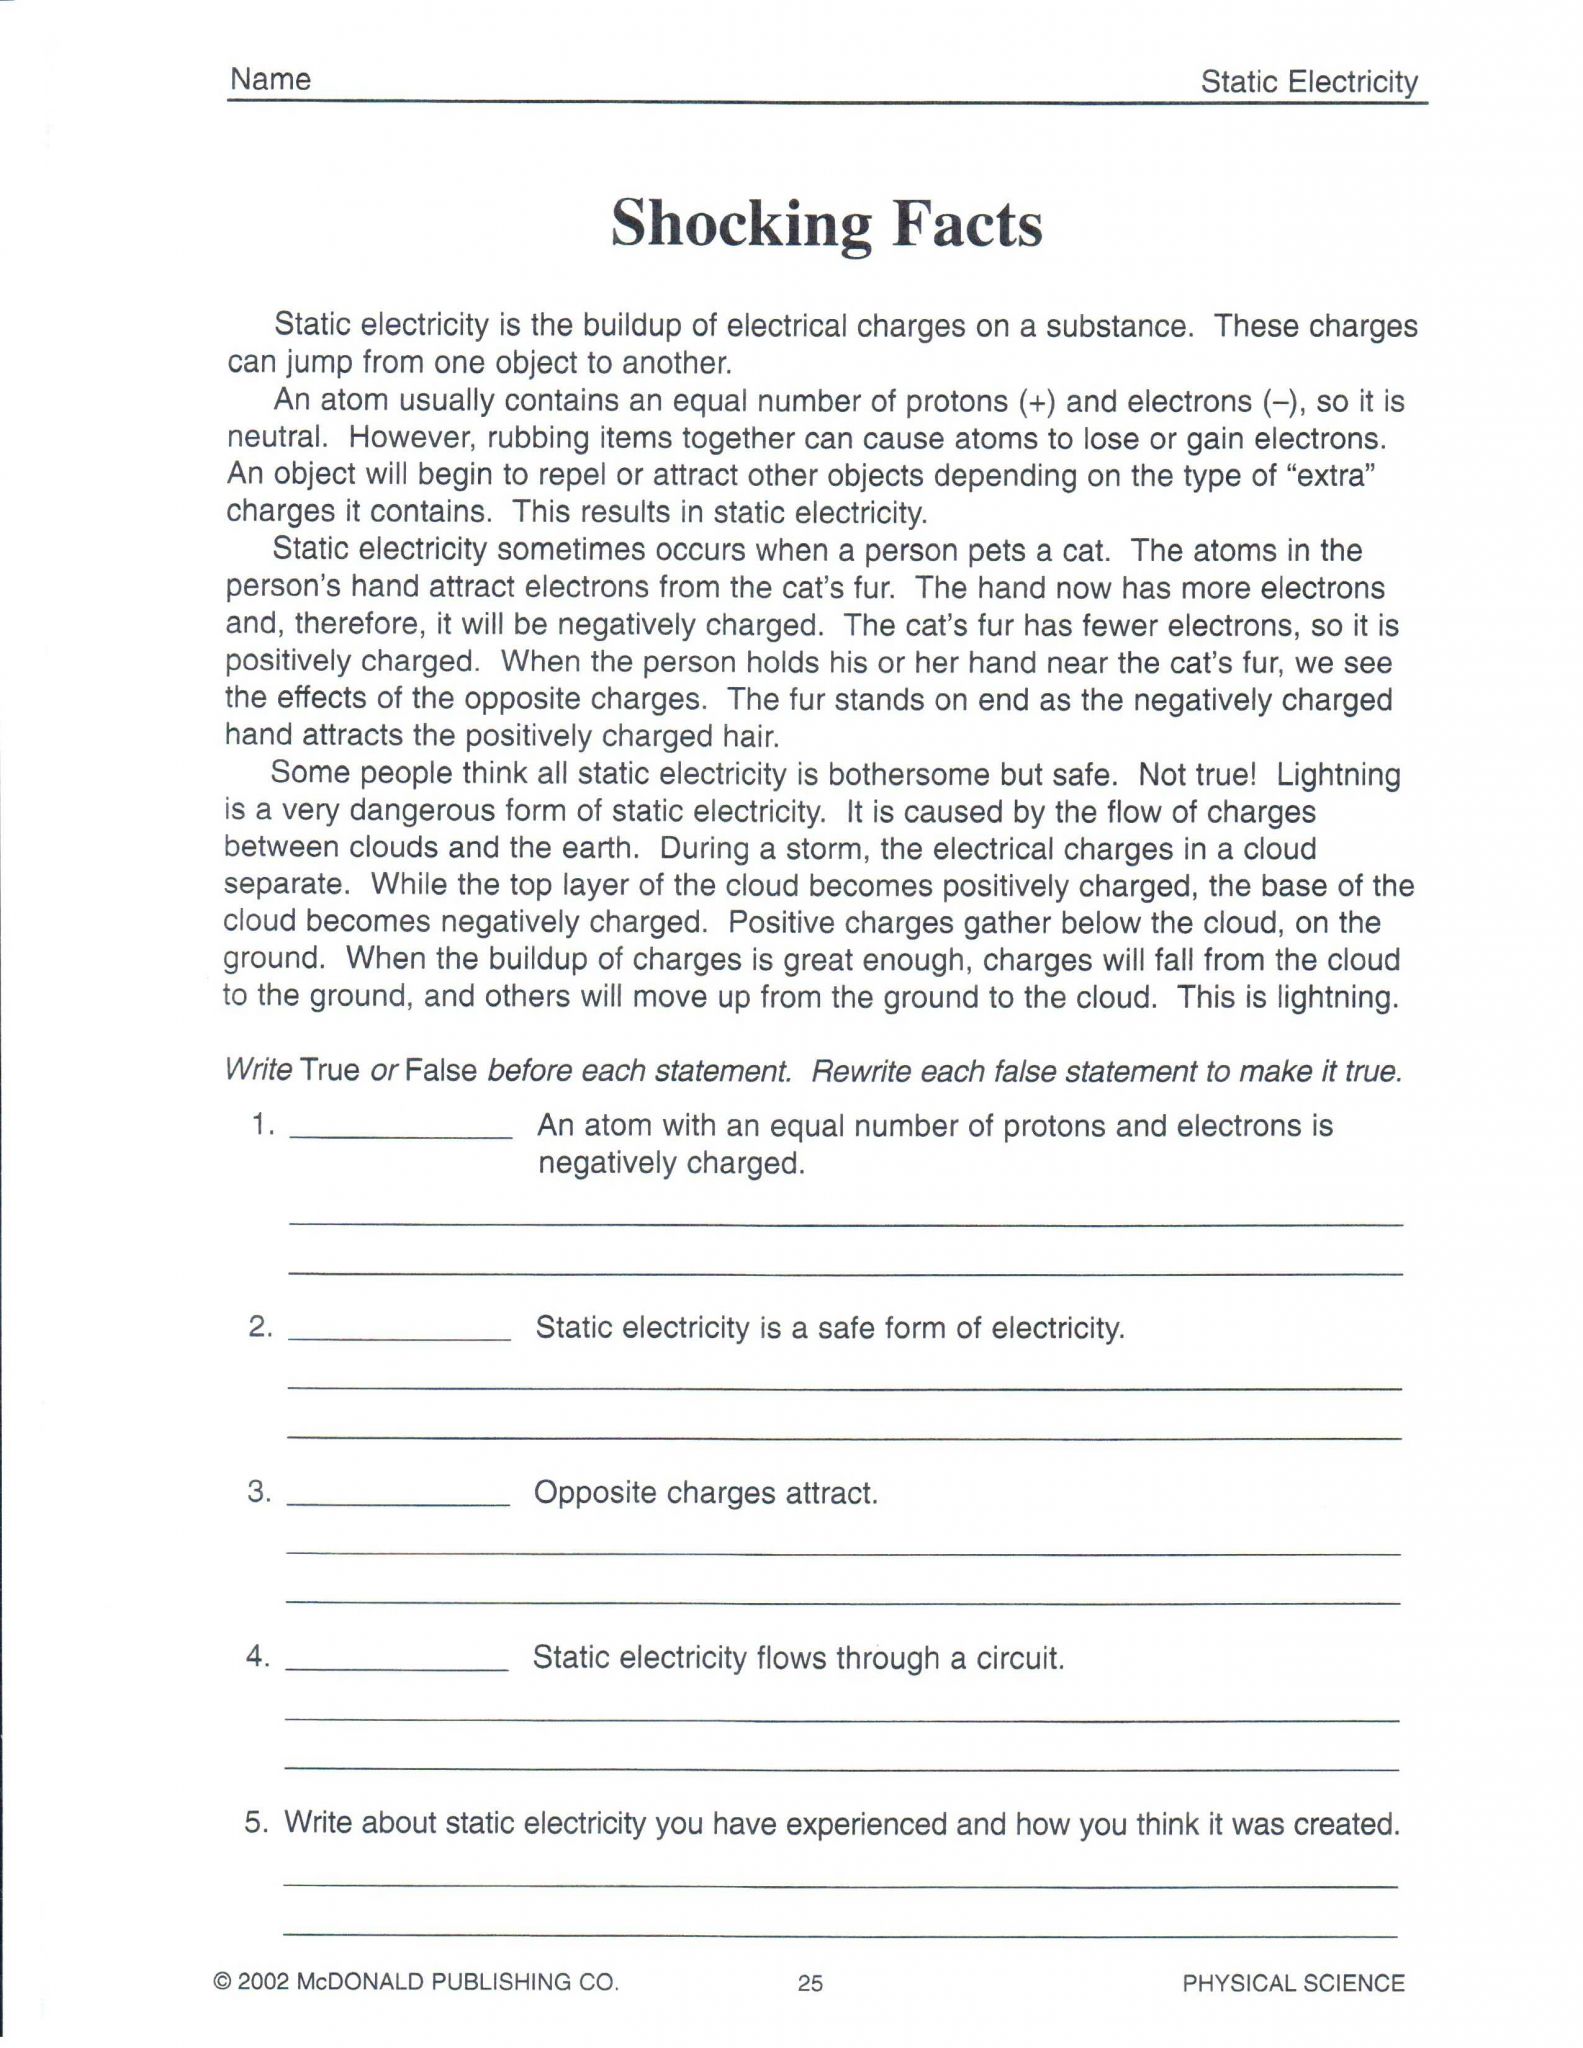 Bill Nye the Science Guy Energy Worksheet as Well as Bill Nye Magnetism Worksheet Image Collections Worksheet for Kids